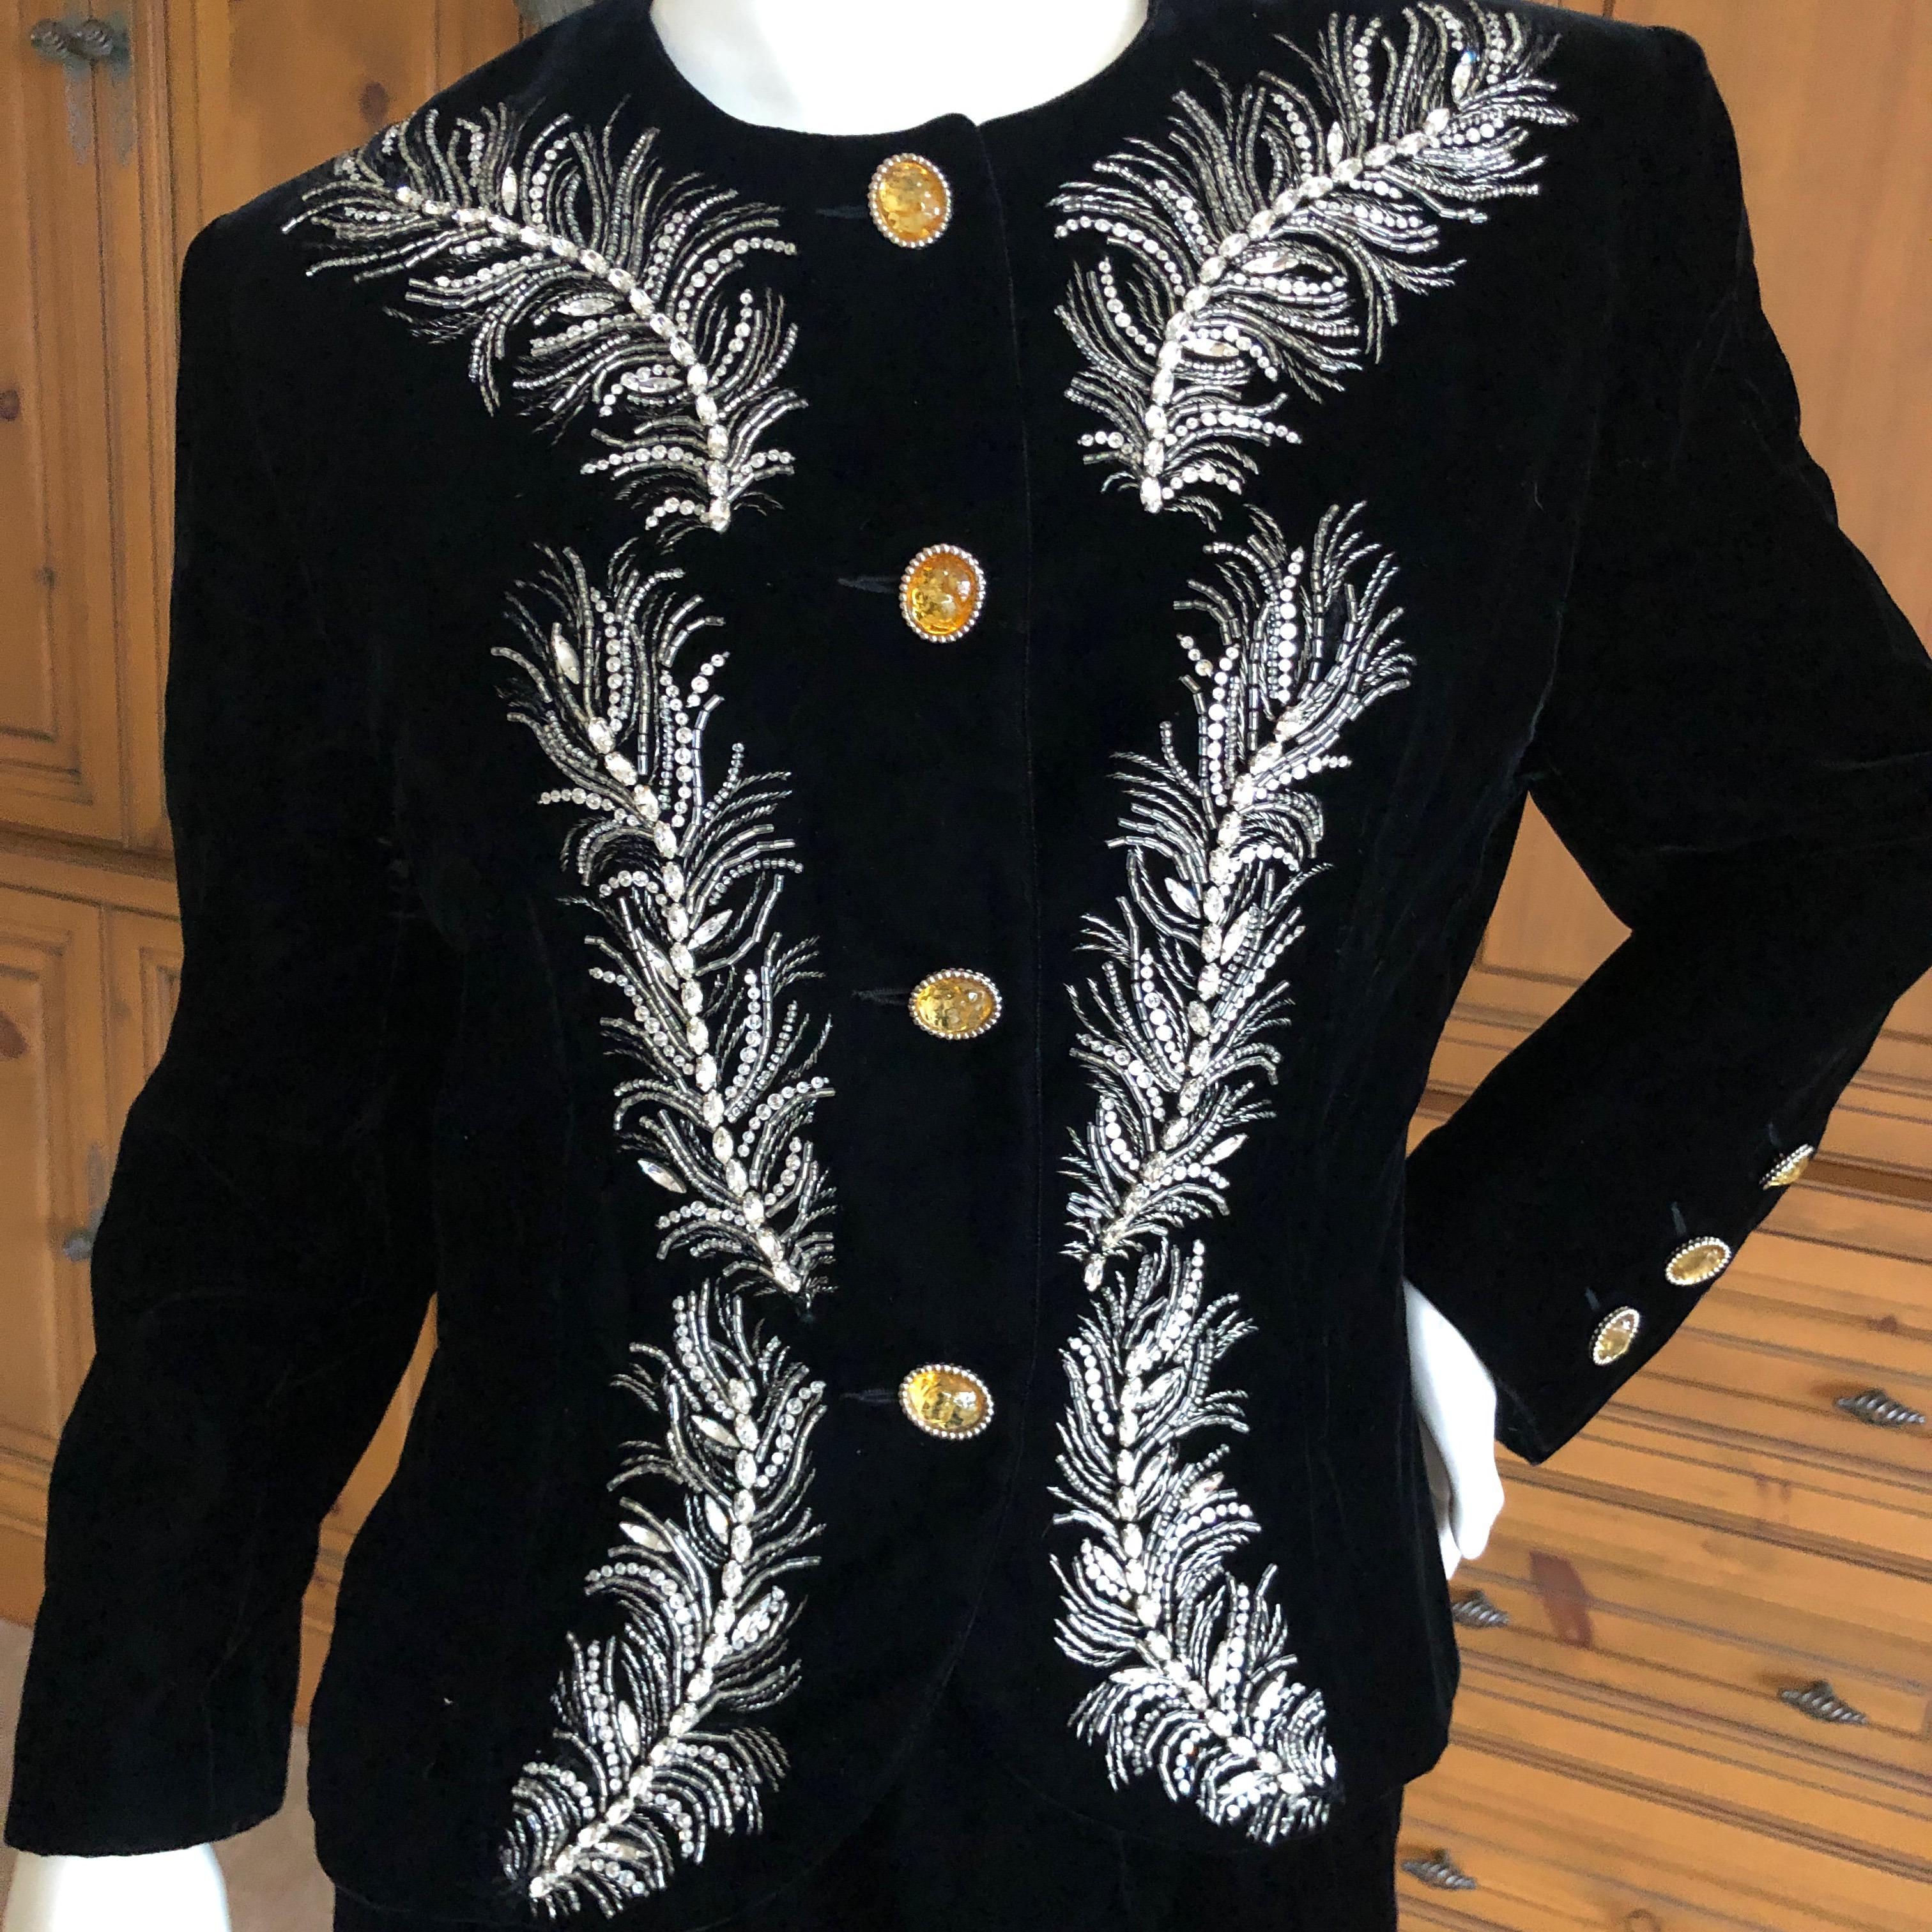 Exquisite black velvet evening ensemble with dramatic crystal and bead embellished plumes by Maison Lesage, by Gianfranco Ferre for Christian Dior.
Numbered on the label, the demi couture was between Haute Couture and Pret a Porter.
Decorated with